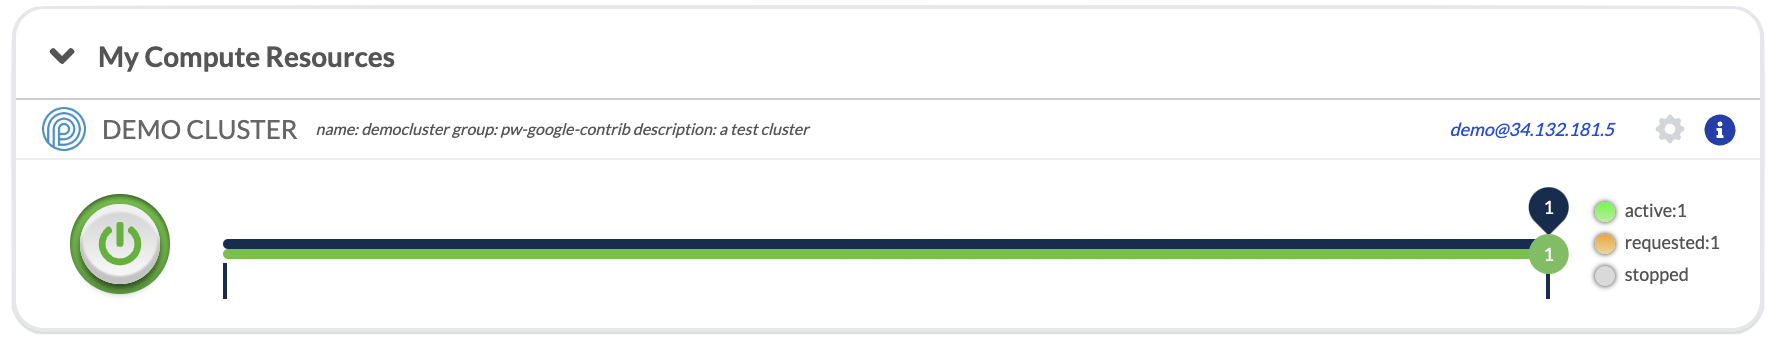 Screenshot of active cluster. The power button is solid green and the active bubble on the right is green.